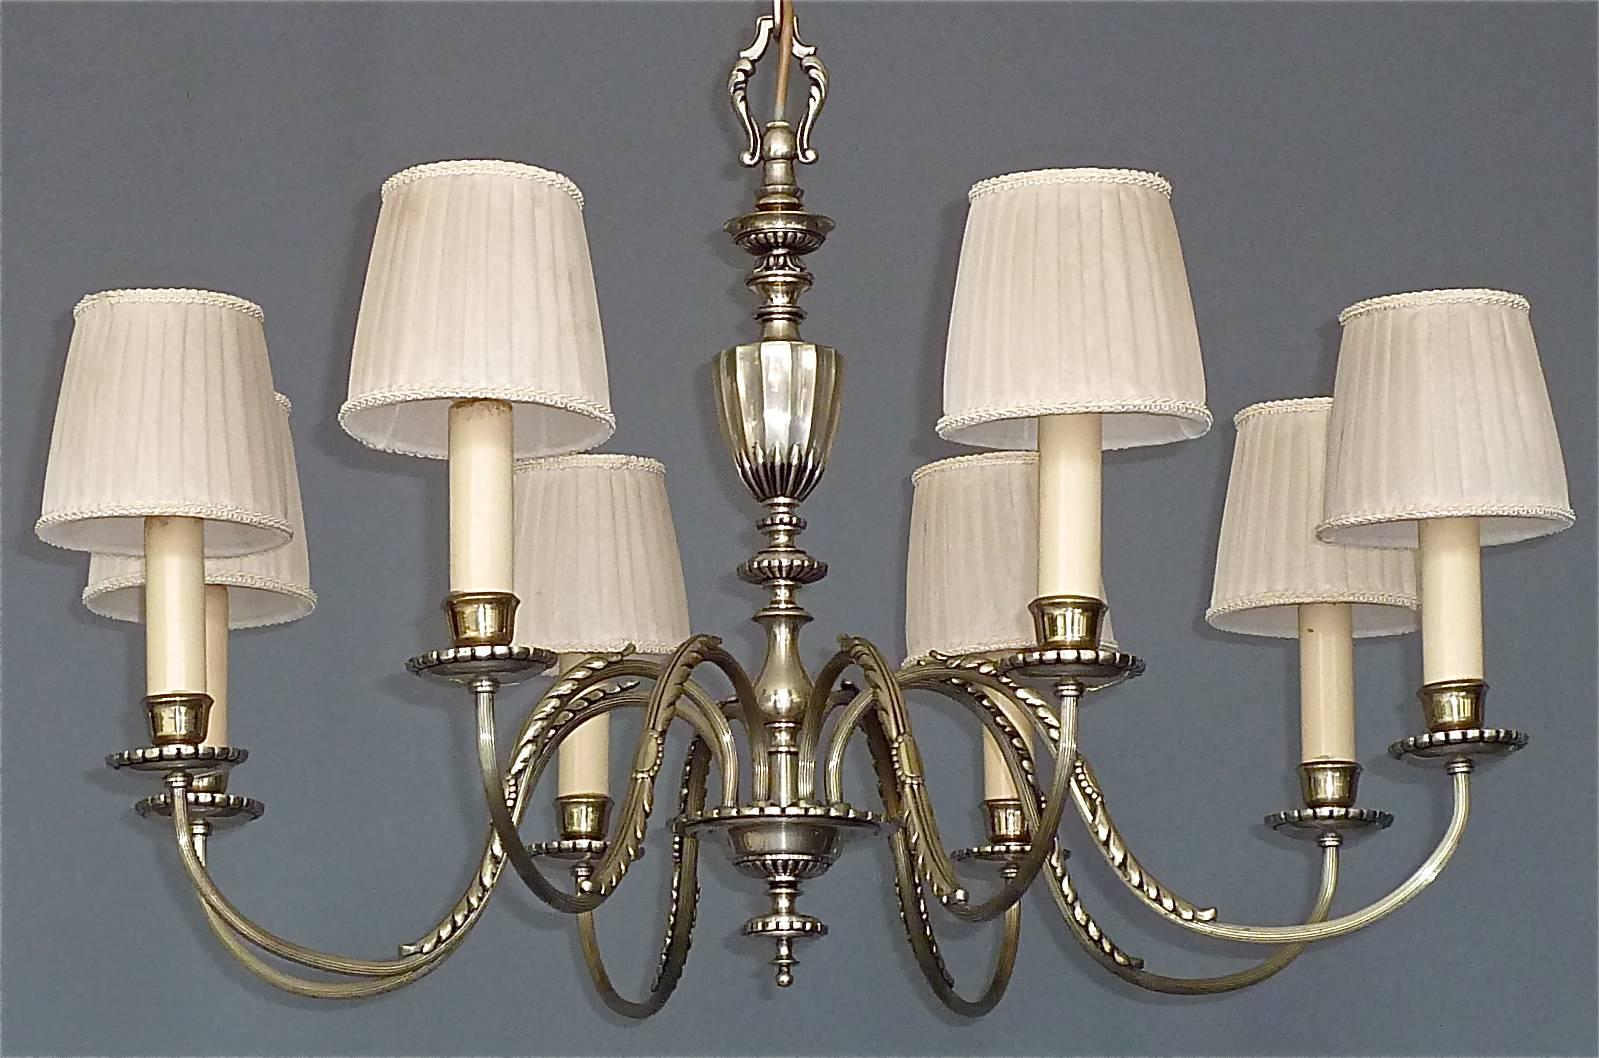 Plated Elegant Large Empire Style Classical Silver Chandelier Eight-Light Pendant, 1920 For Sale